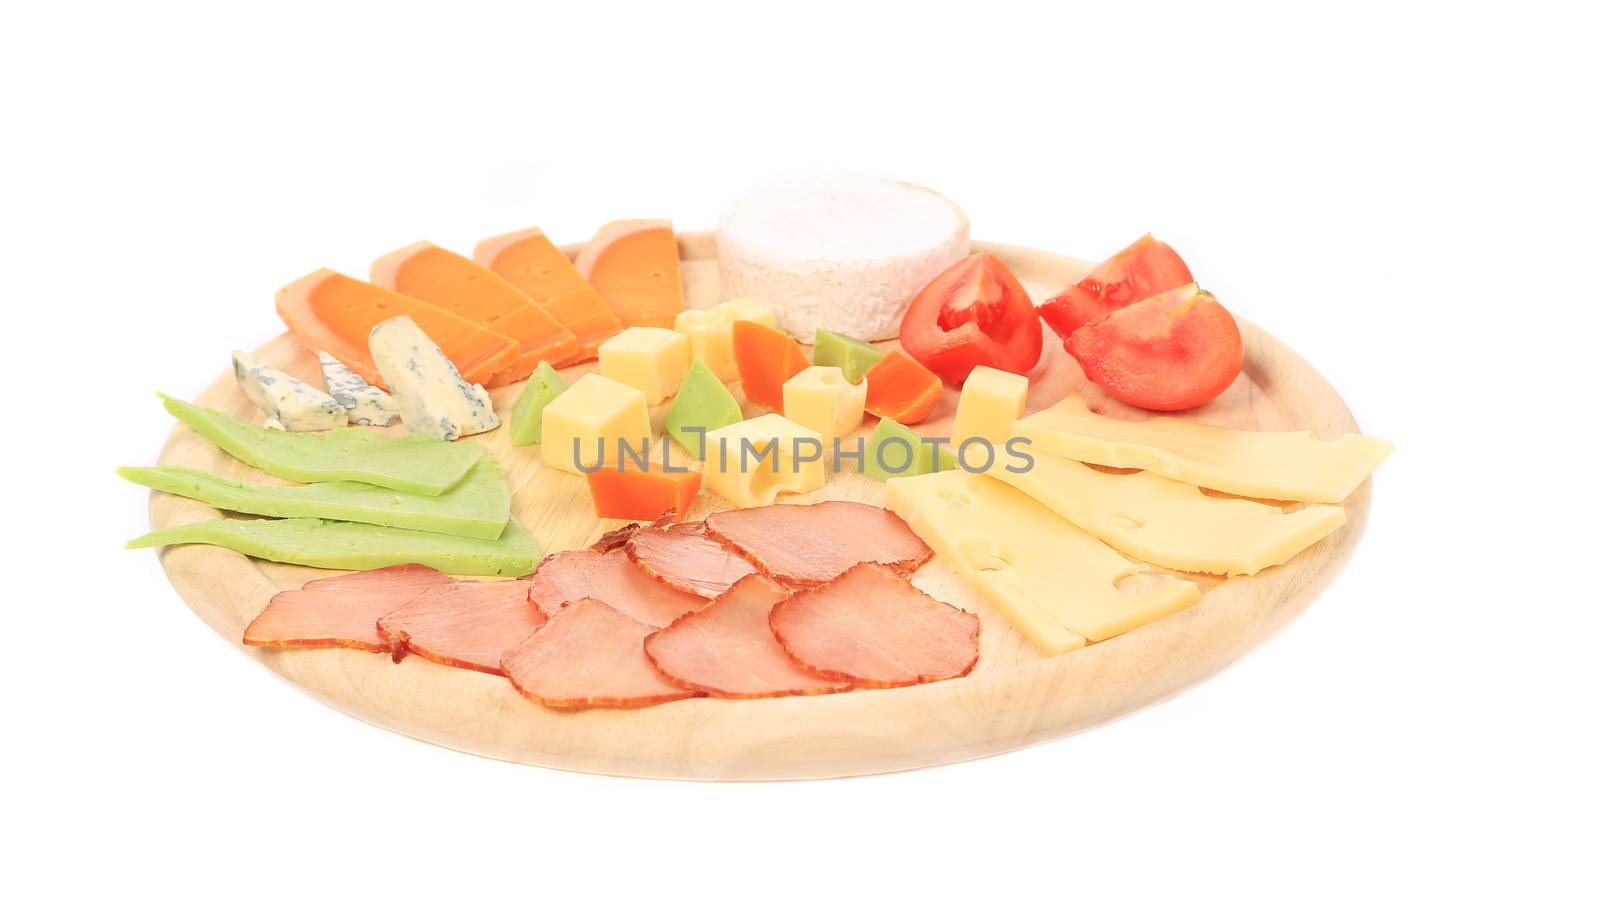 Meat and cheese platter. Isolated on a white background.